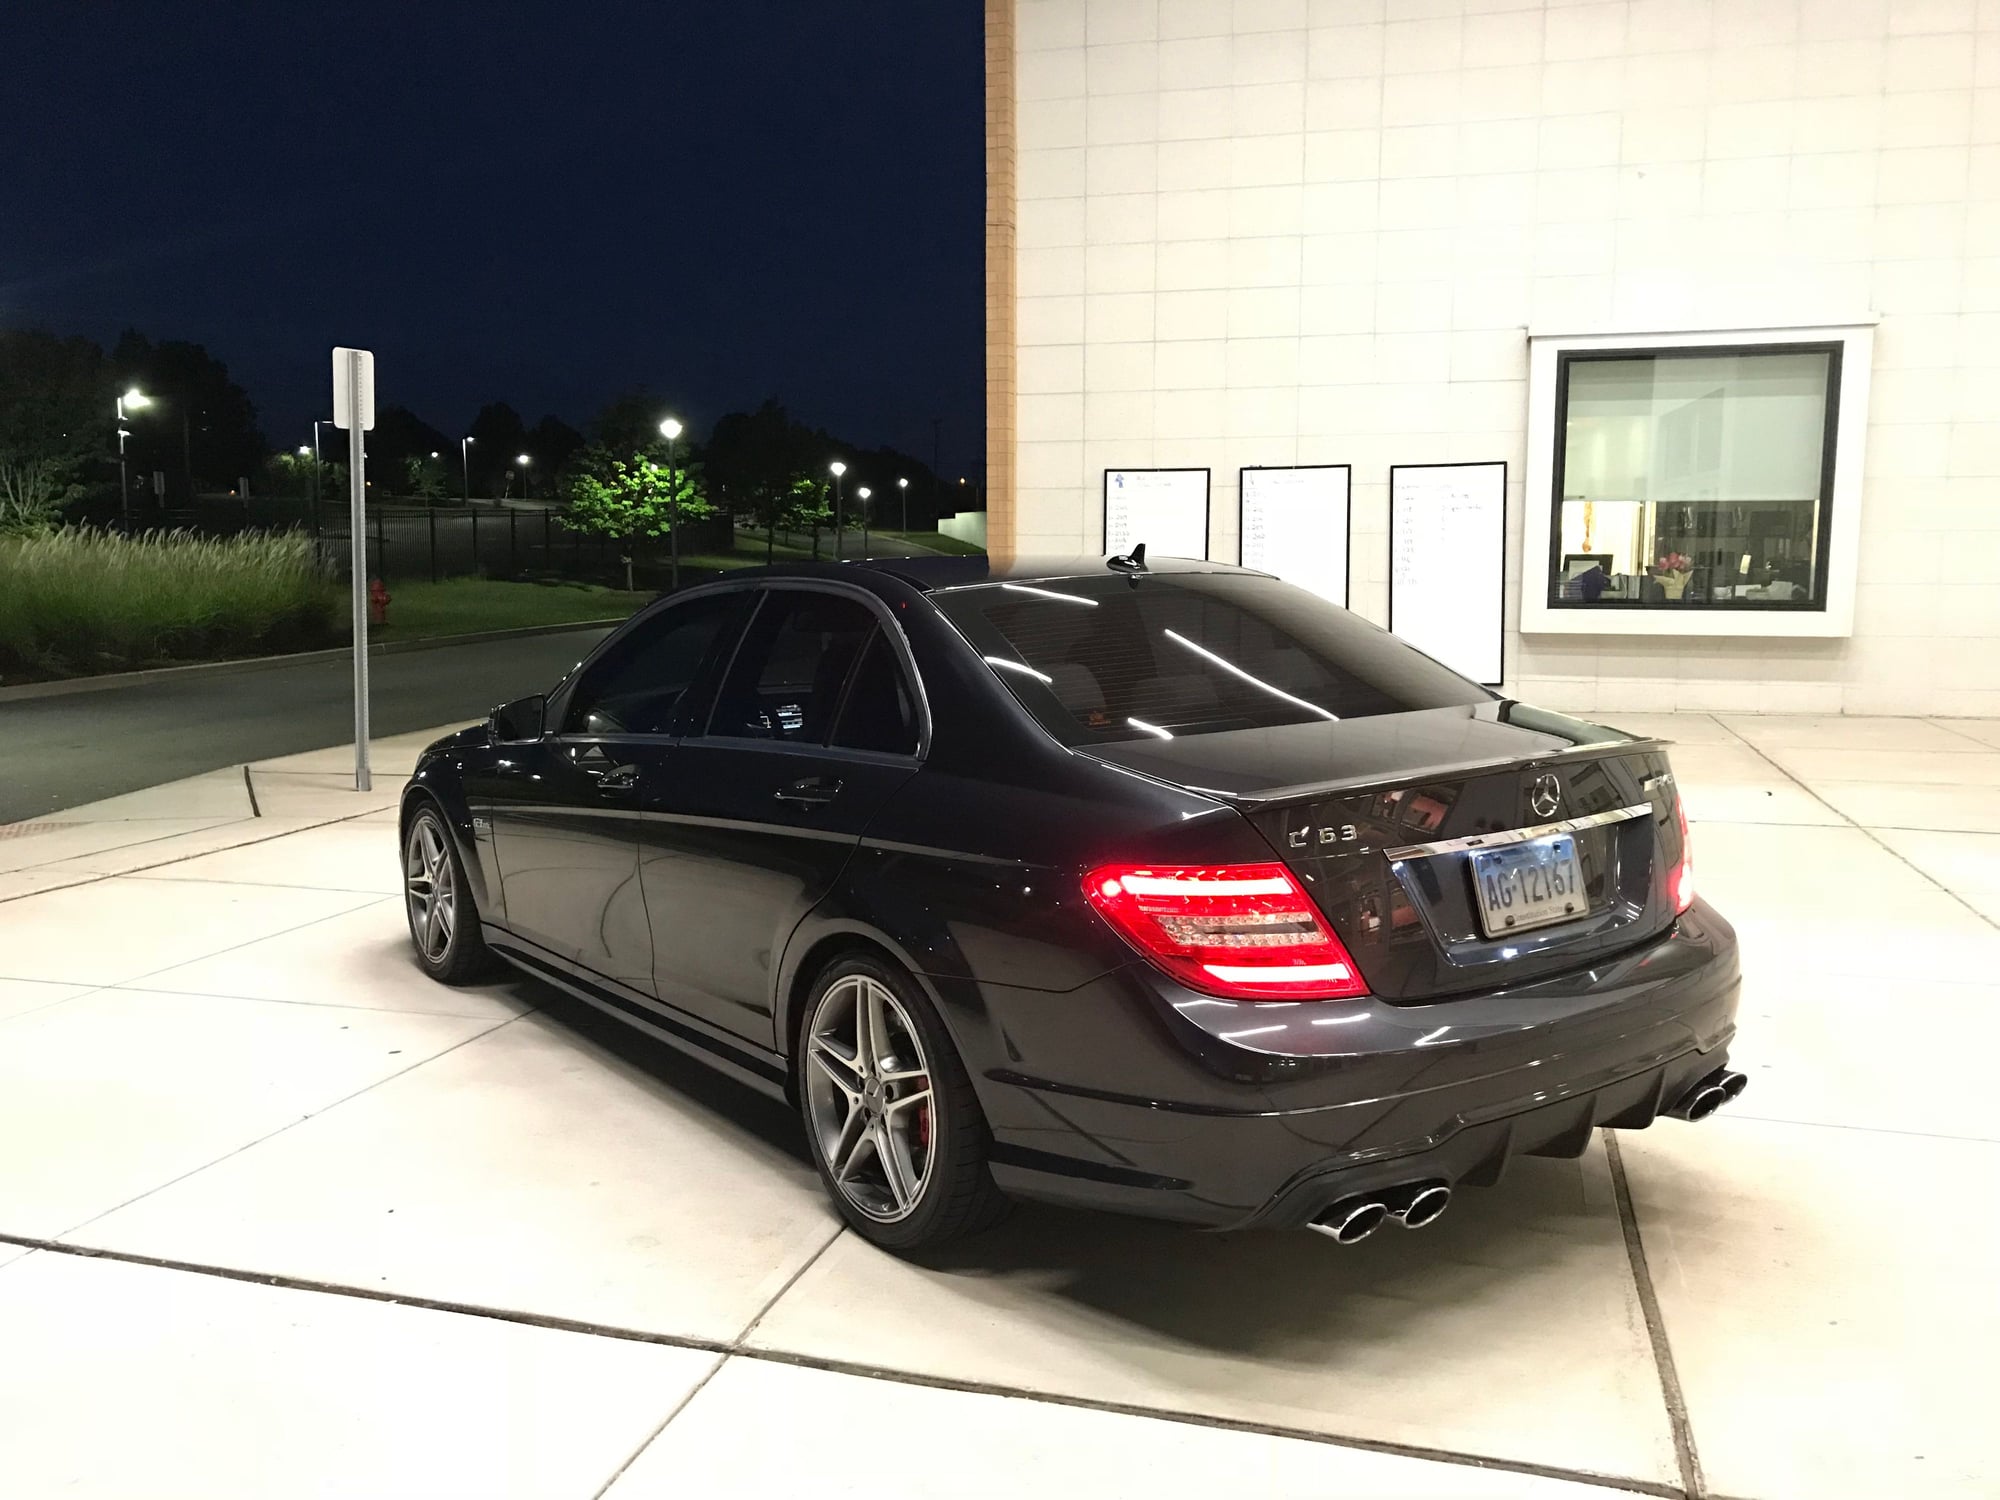 2012 Mercedes-Benz C63 AMG - 2012 Mercedes-Benz C63 AMG P31 Package with LSD. 42,900 mi - Used - VIN WDDGF7HB9CA581790 - 42,900 Miles - 8 cyl - 2WD - Automatic - Sedan - Black - New Britain, CT 06053, United States